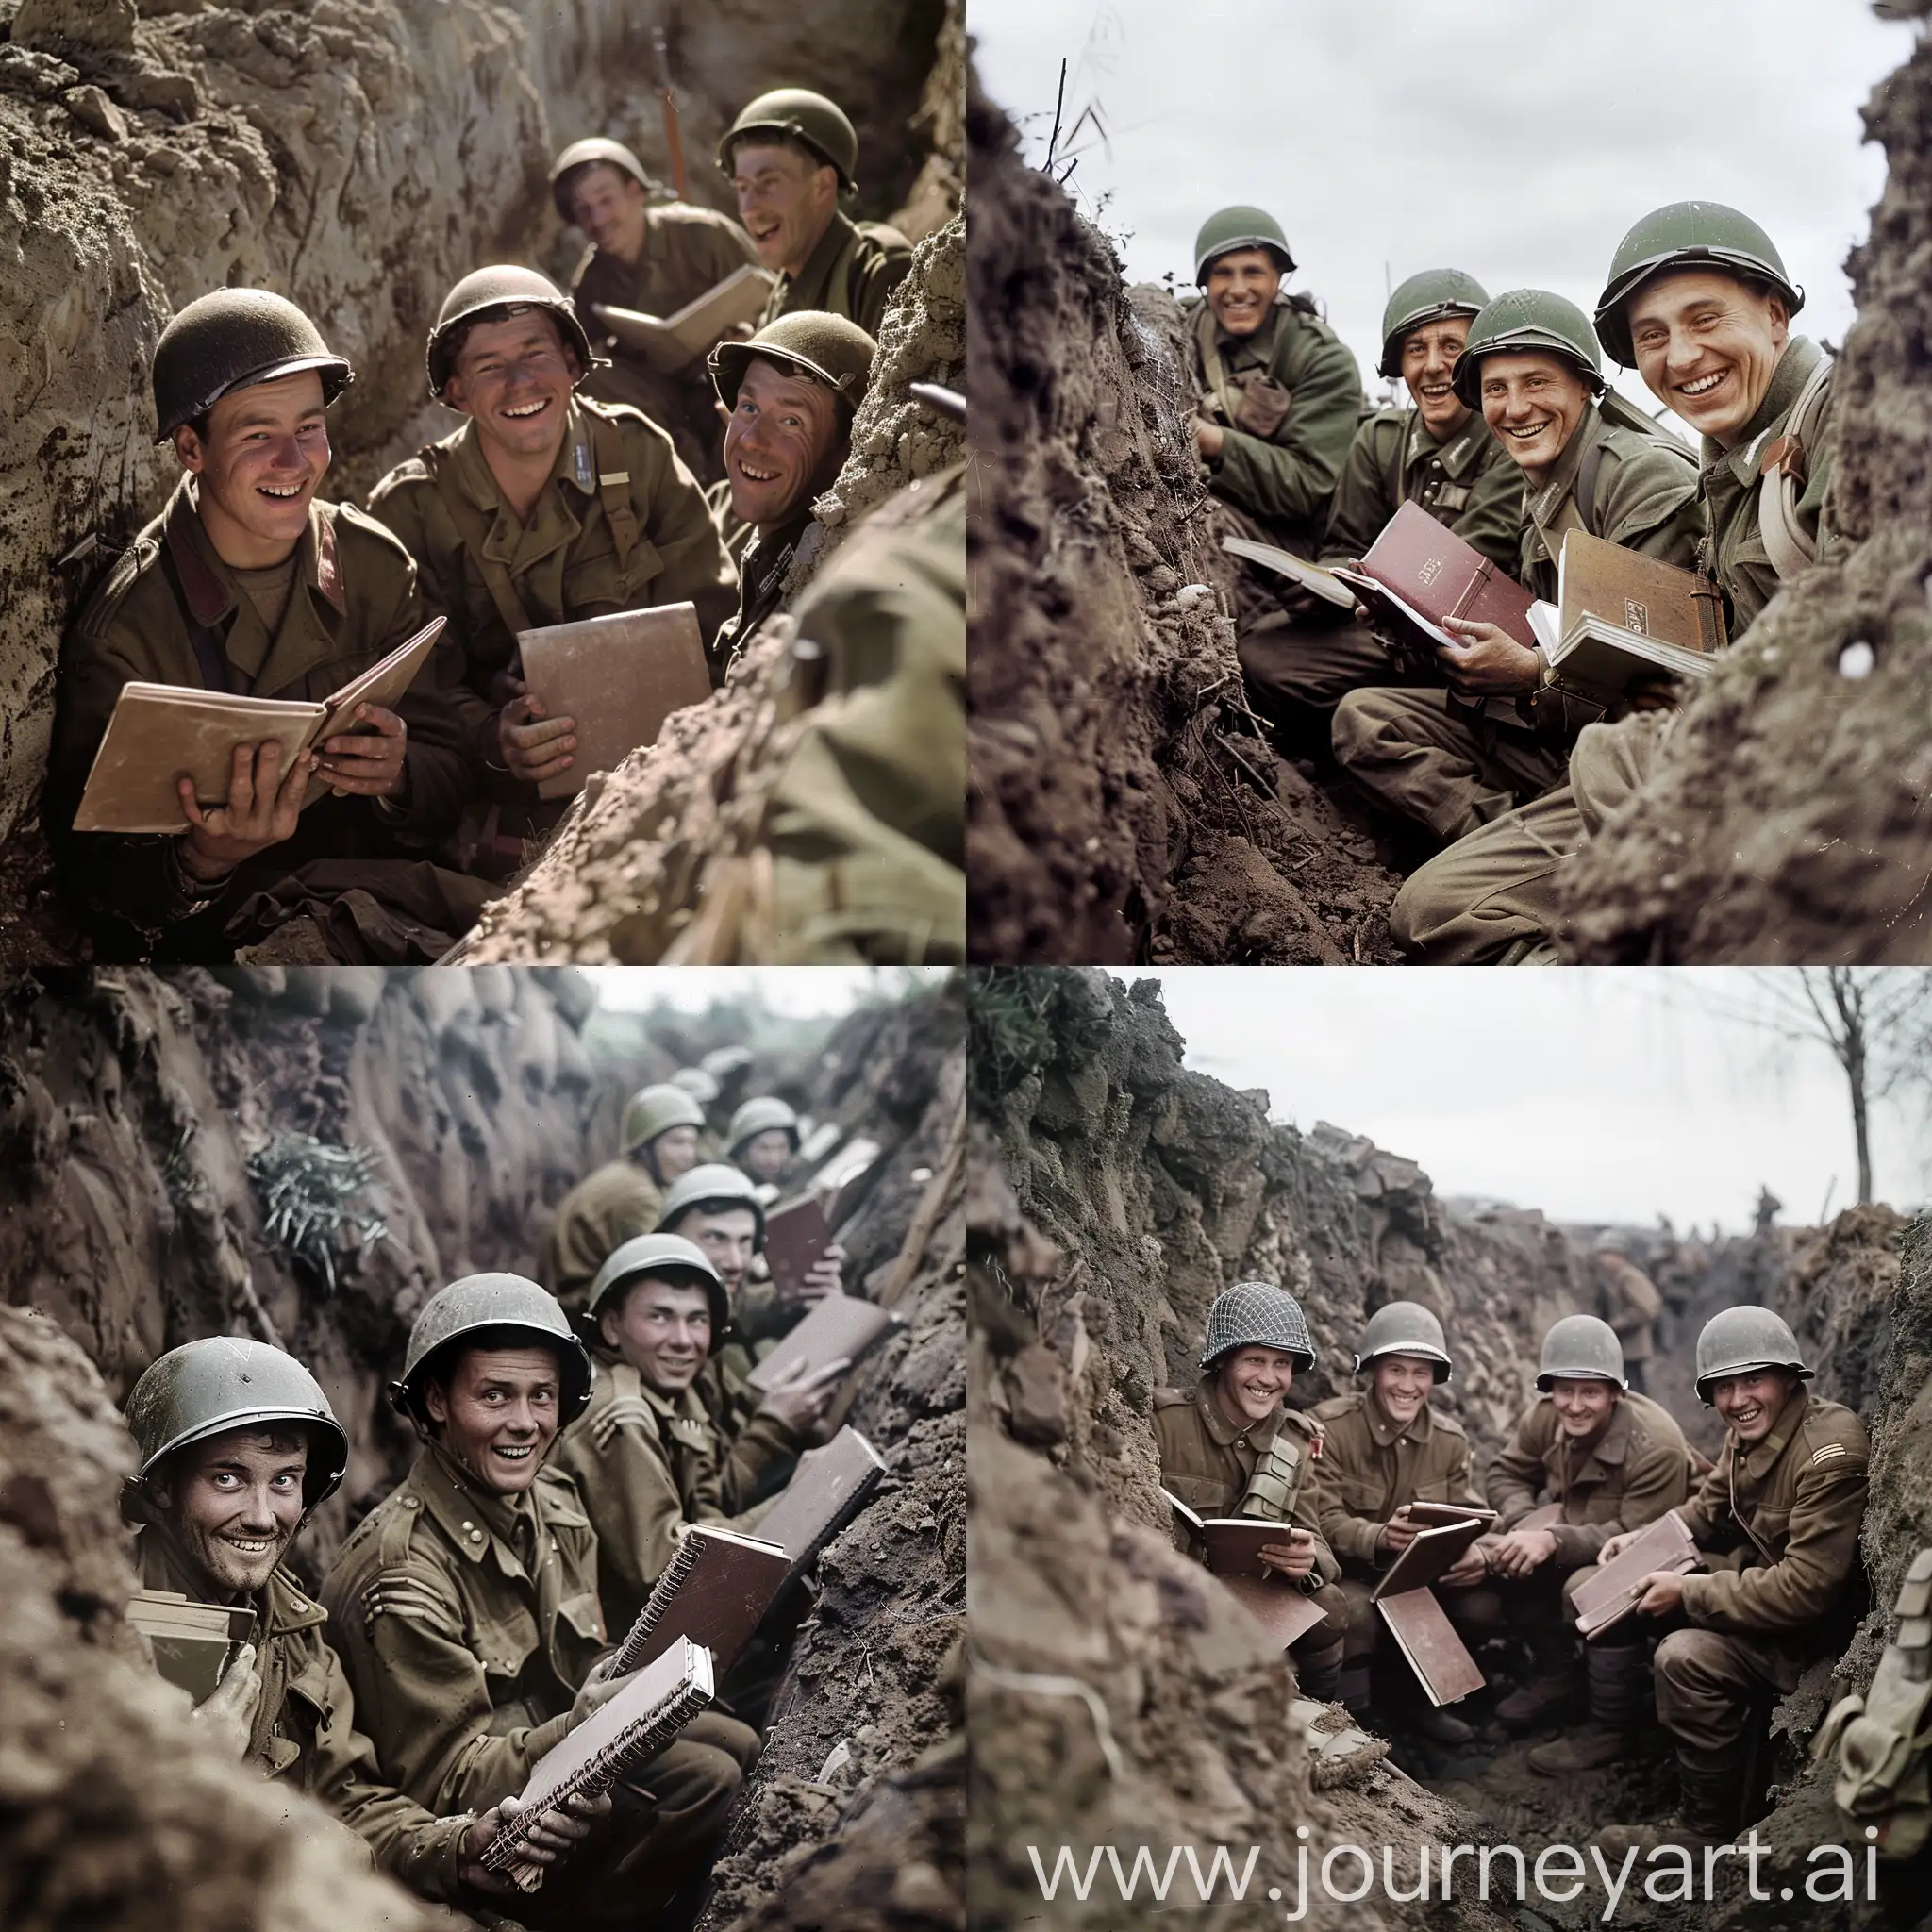 1945-Soldiers-in-Trenches-Writing-in-Vivobook-Notebooks